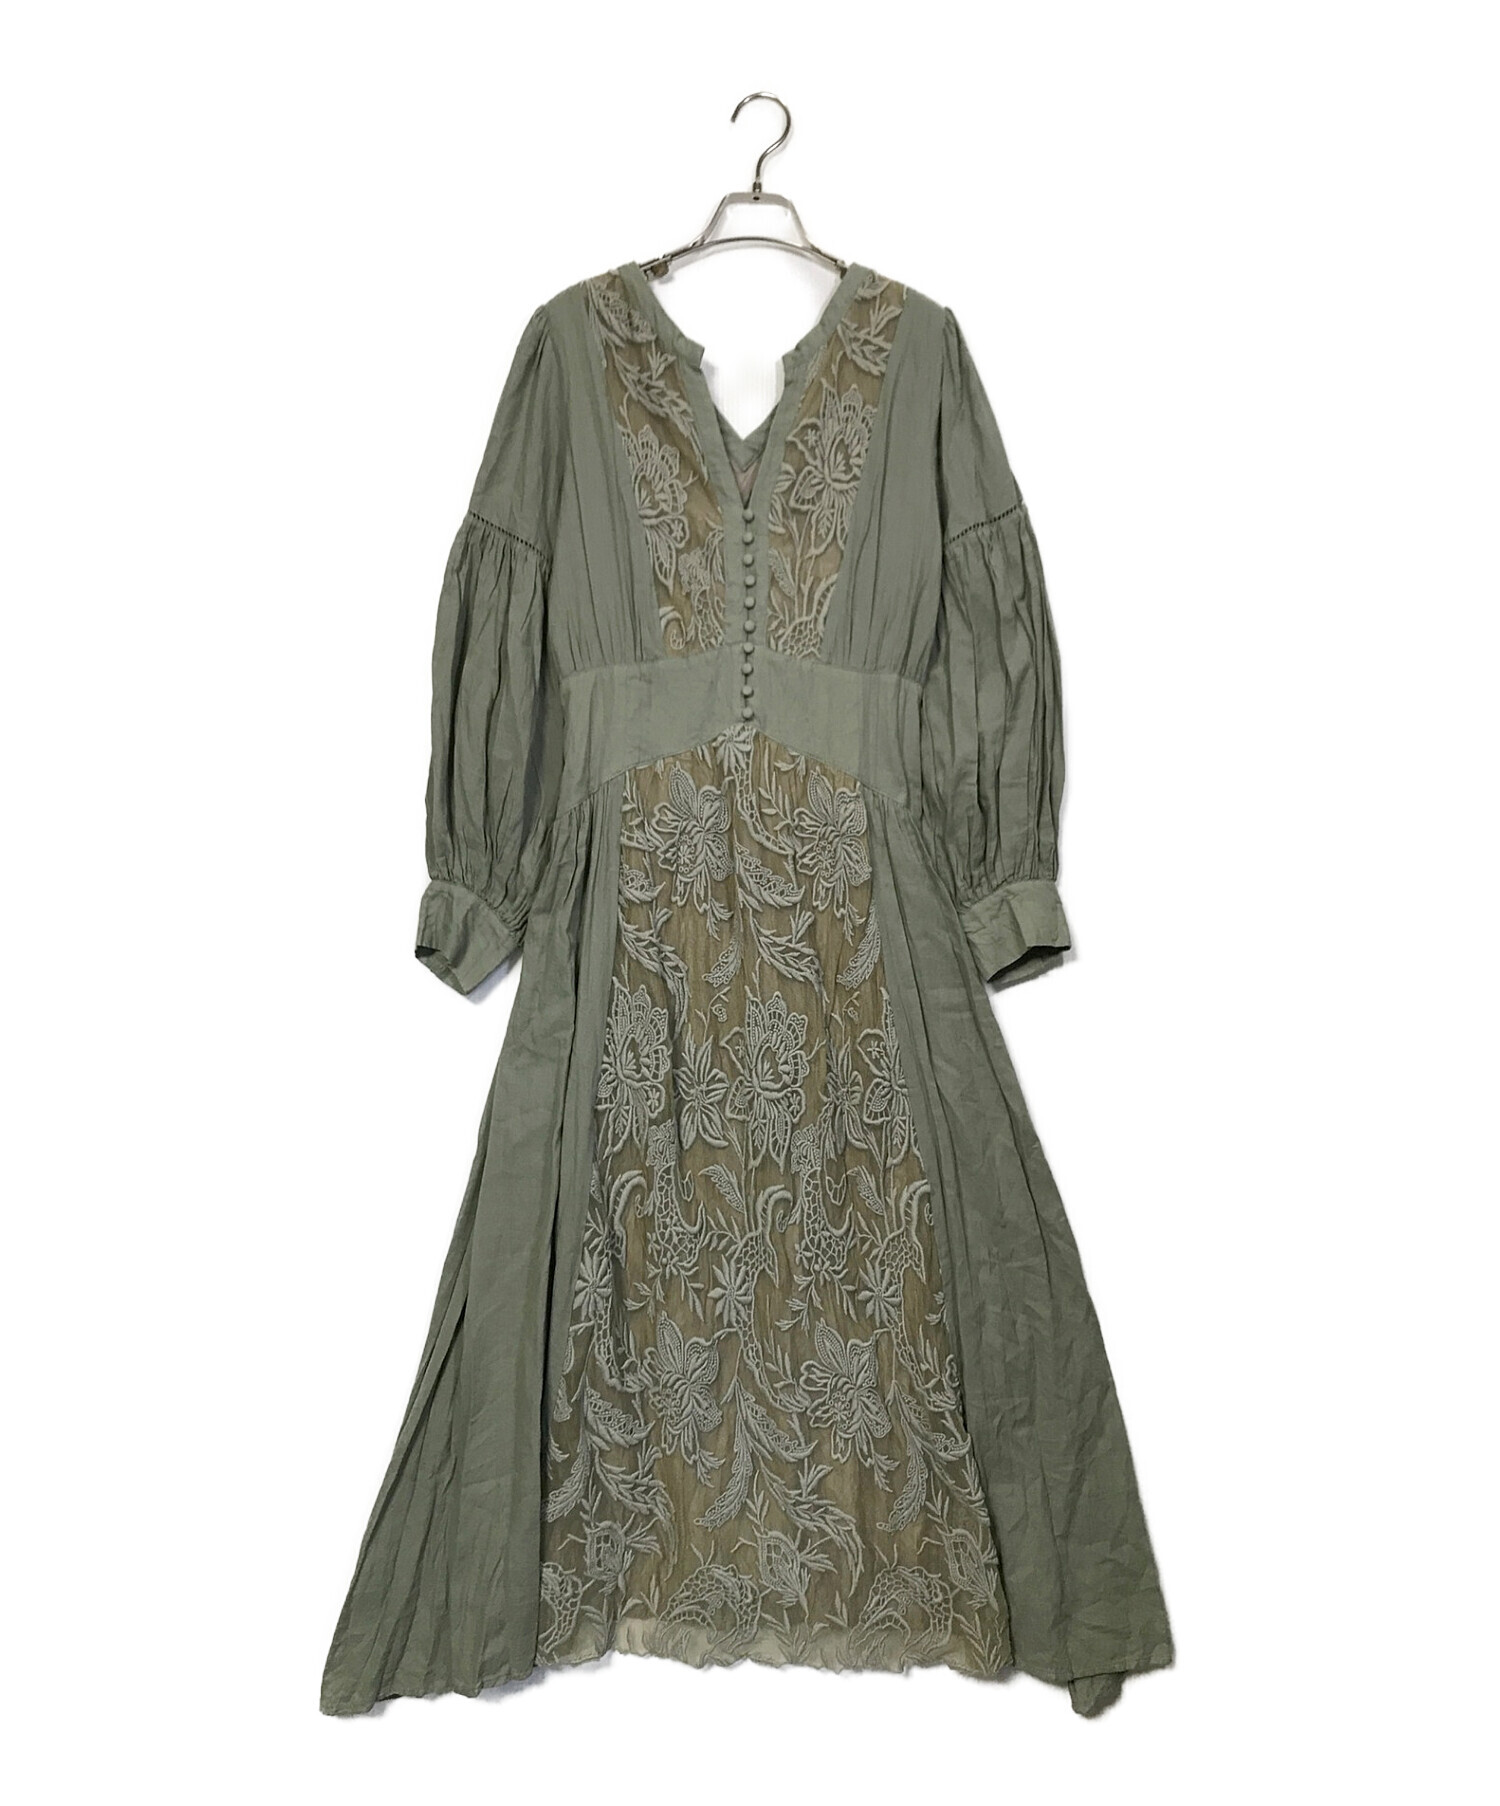 Ameri VINTAGE (アメリヴィンテージ) MEDI EMBROIDERY TULLE LACE DRESS グリーン サイズ:M